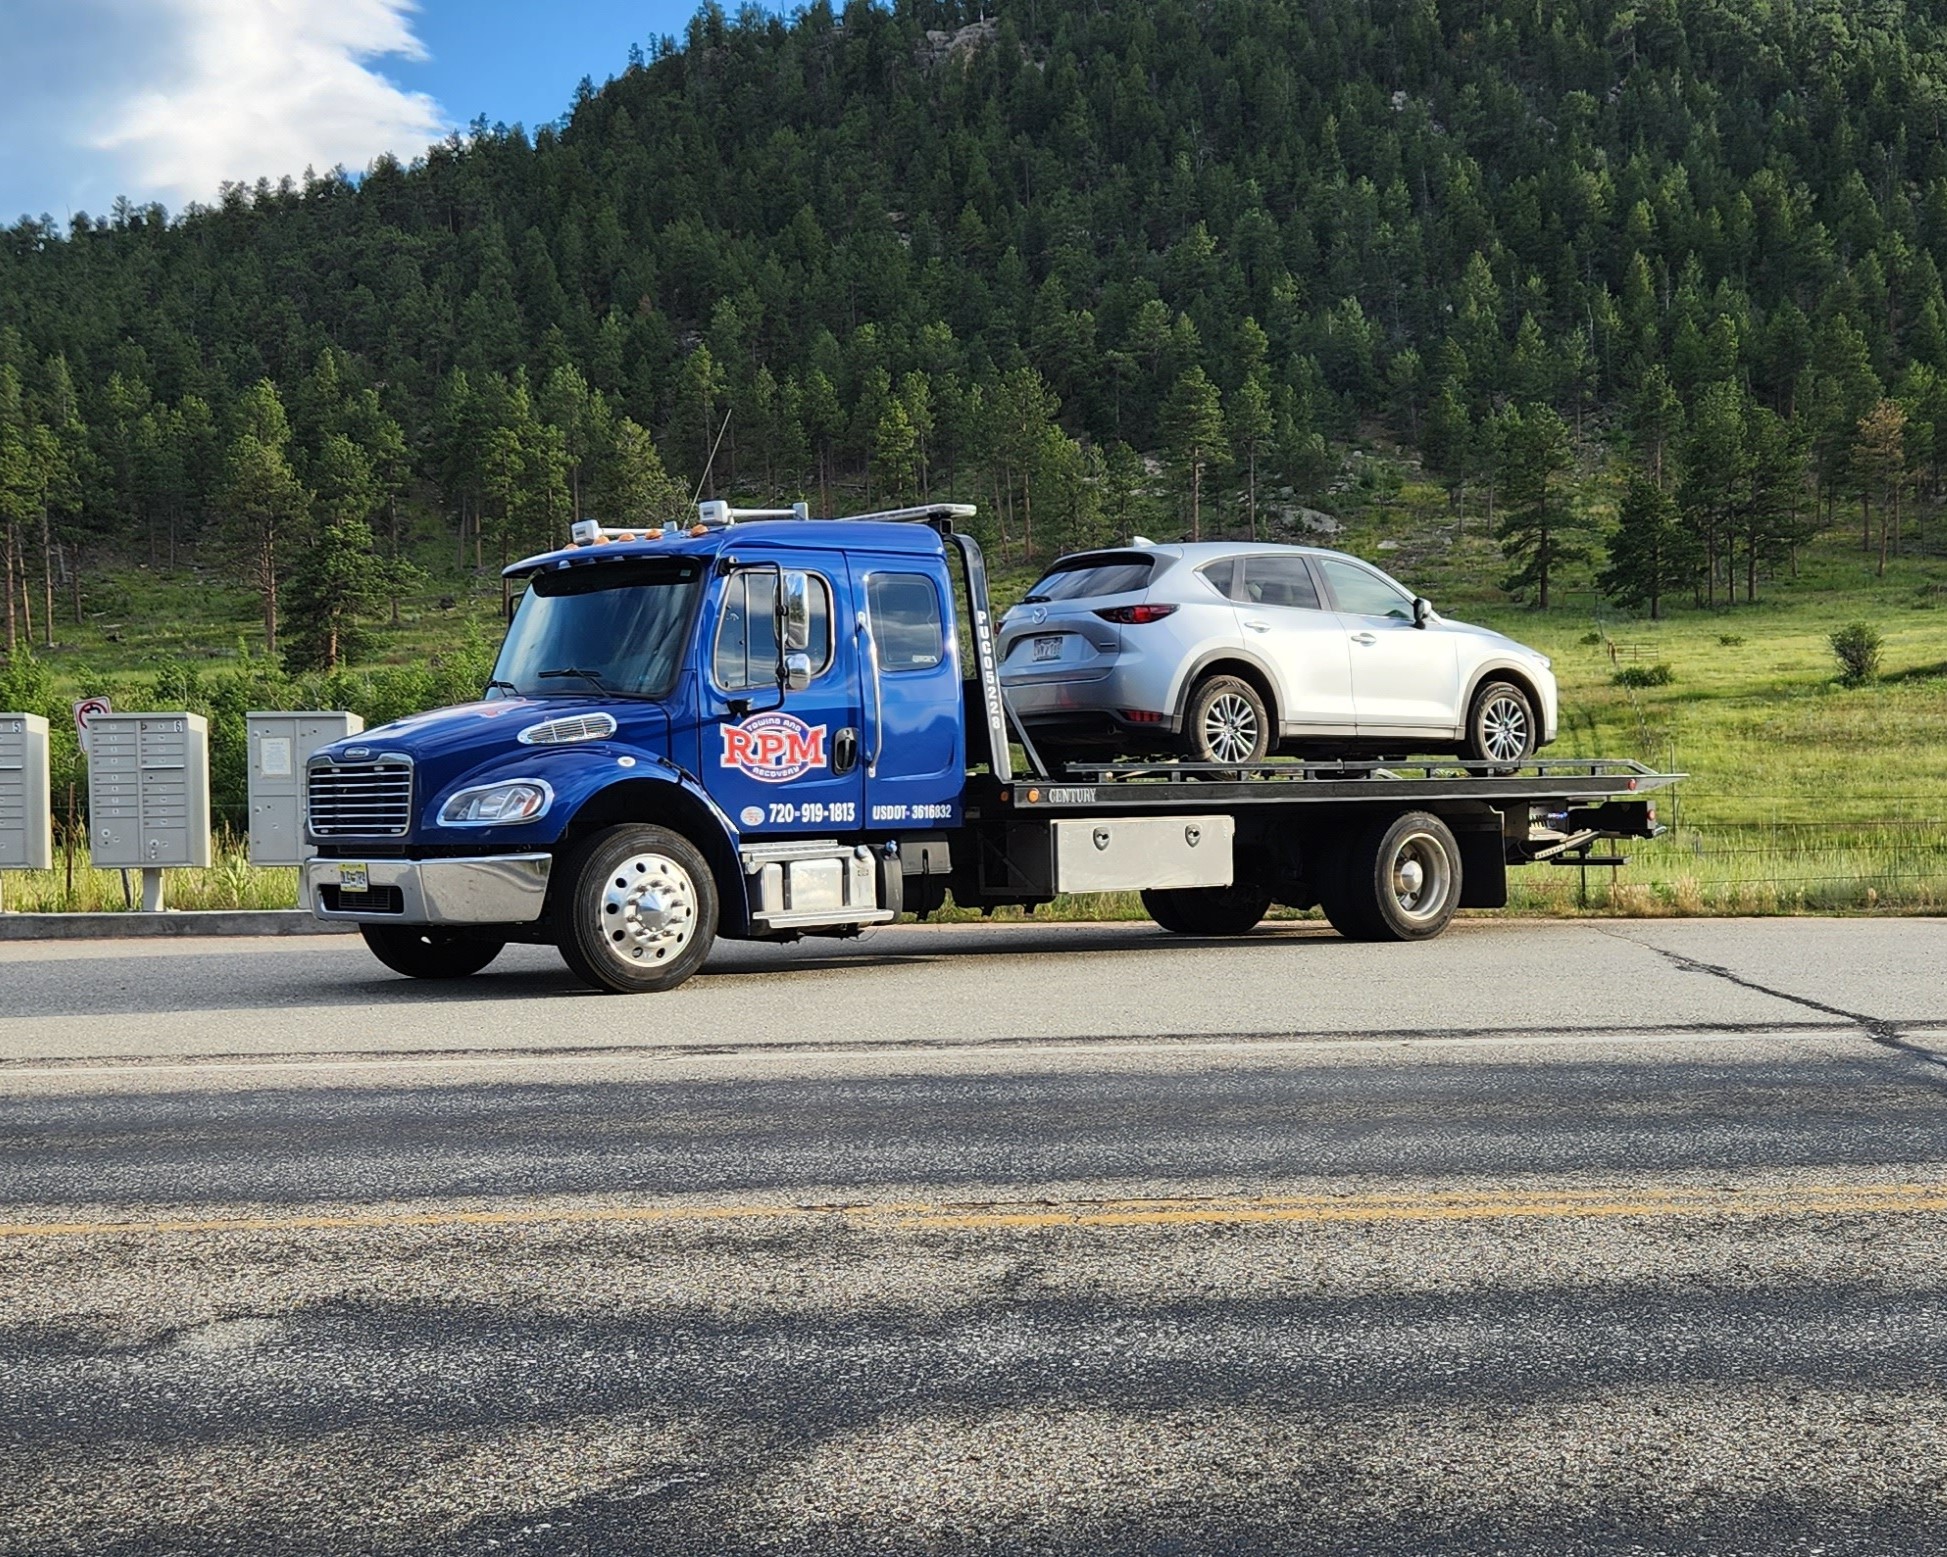 this image shows long-distance towing services in Parker, CO